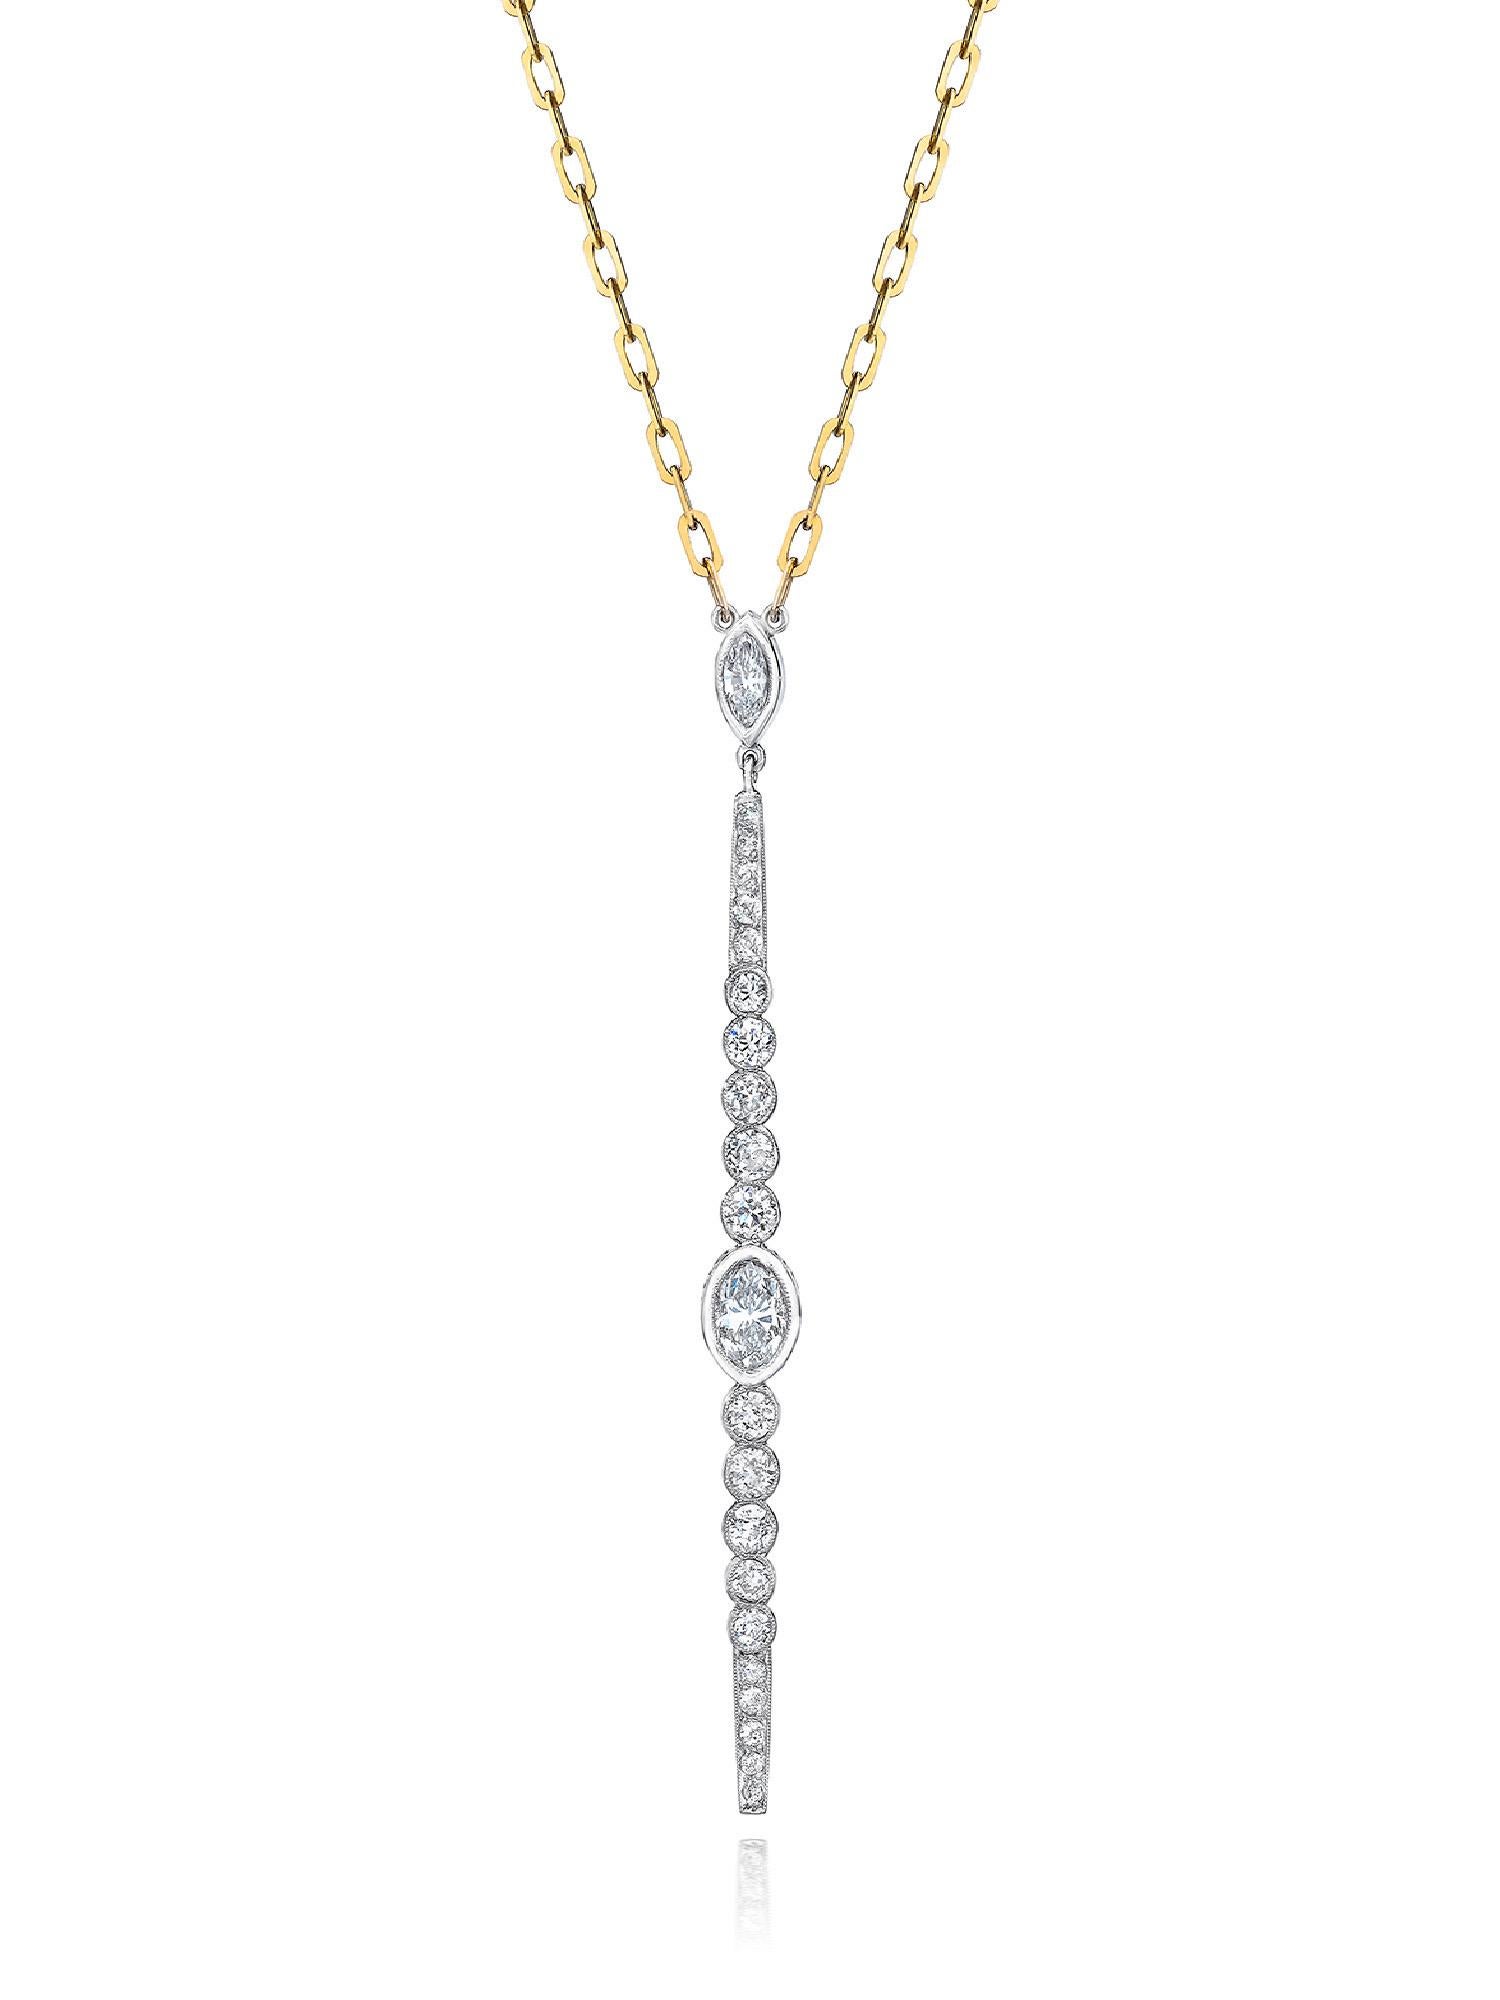 Diamond Marquise bar pendant necklace. 18k Yellow Gold 20 inch long chain. Pendant is approximately 2.90 carats of Diamonds set in Platinum; 3 inches long.